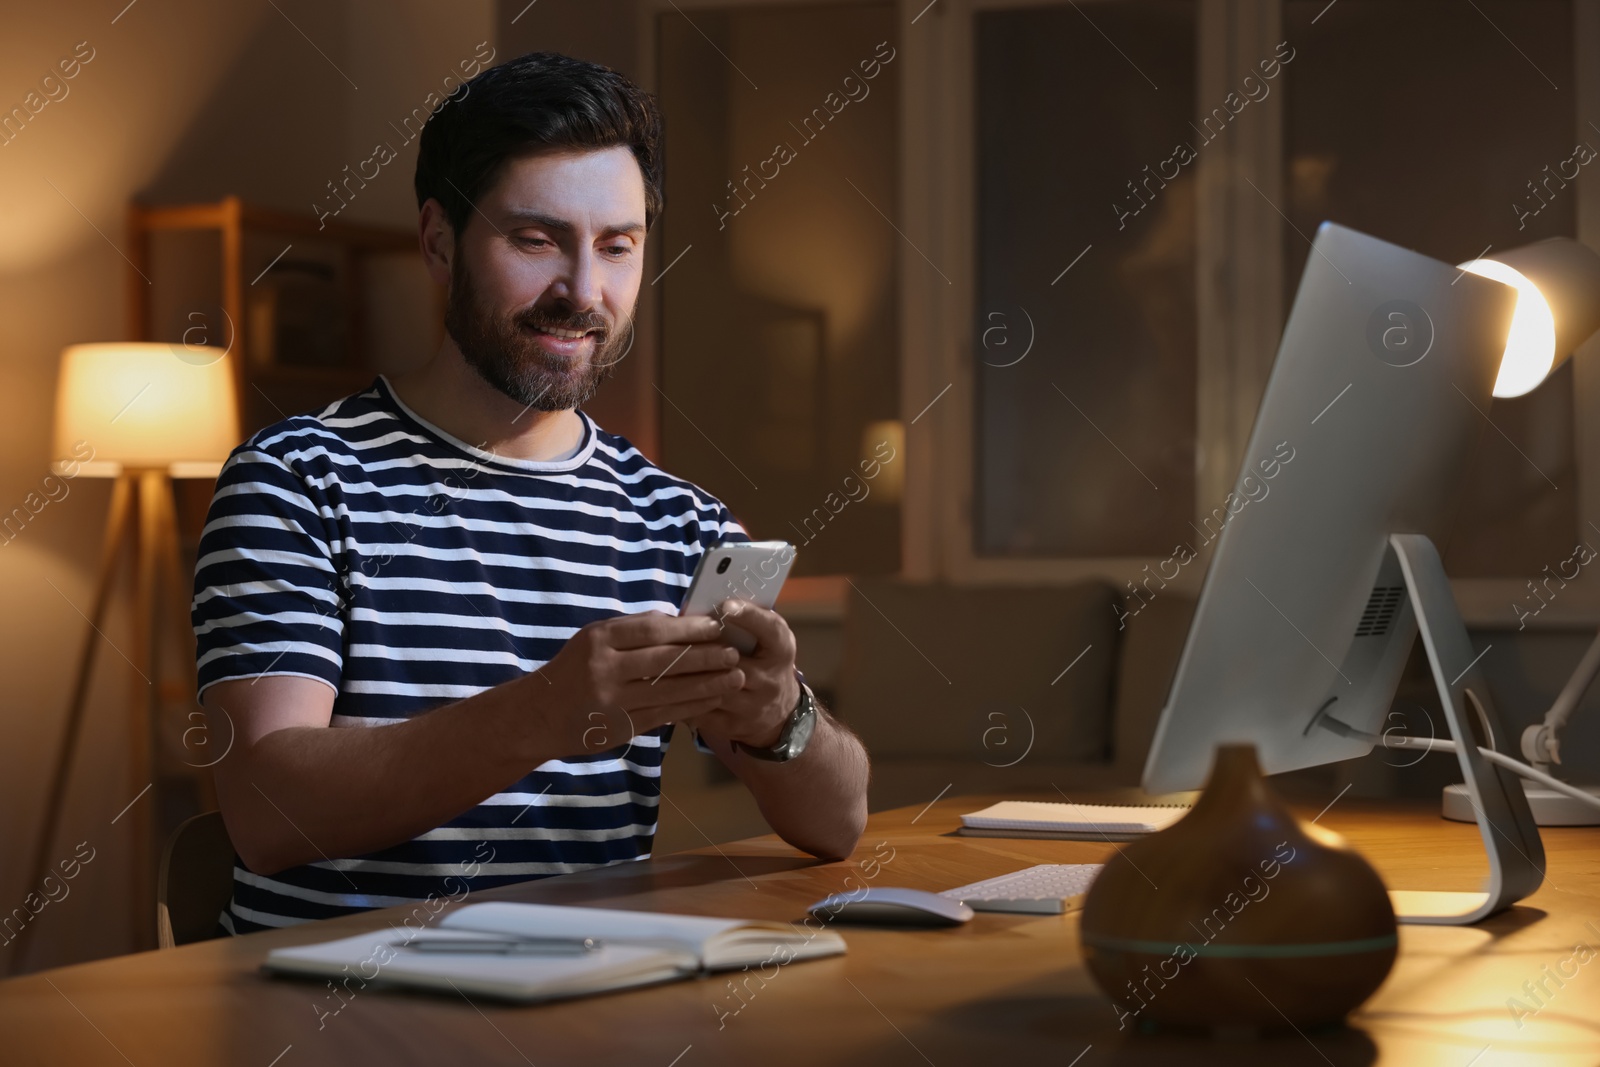 Photo of Home workplace. Happy man using smartphone near computer at wooden desk in room at night